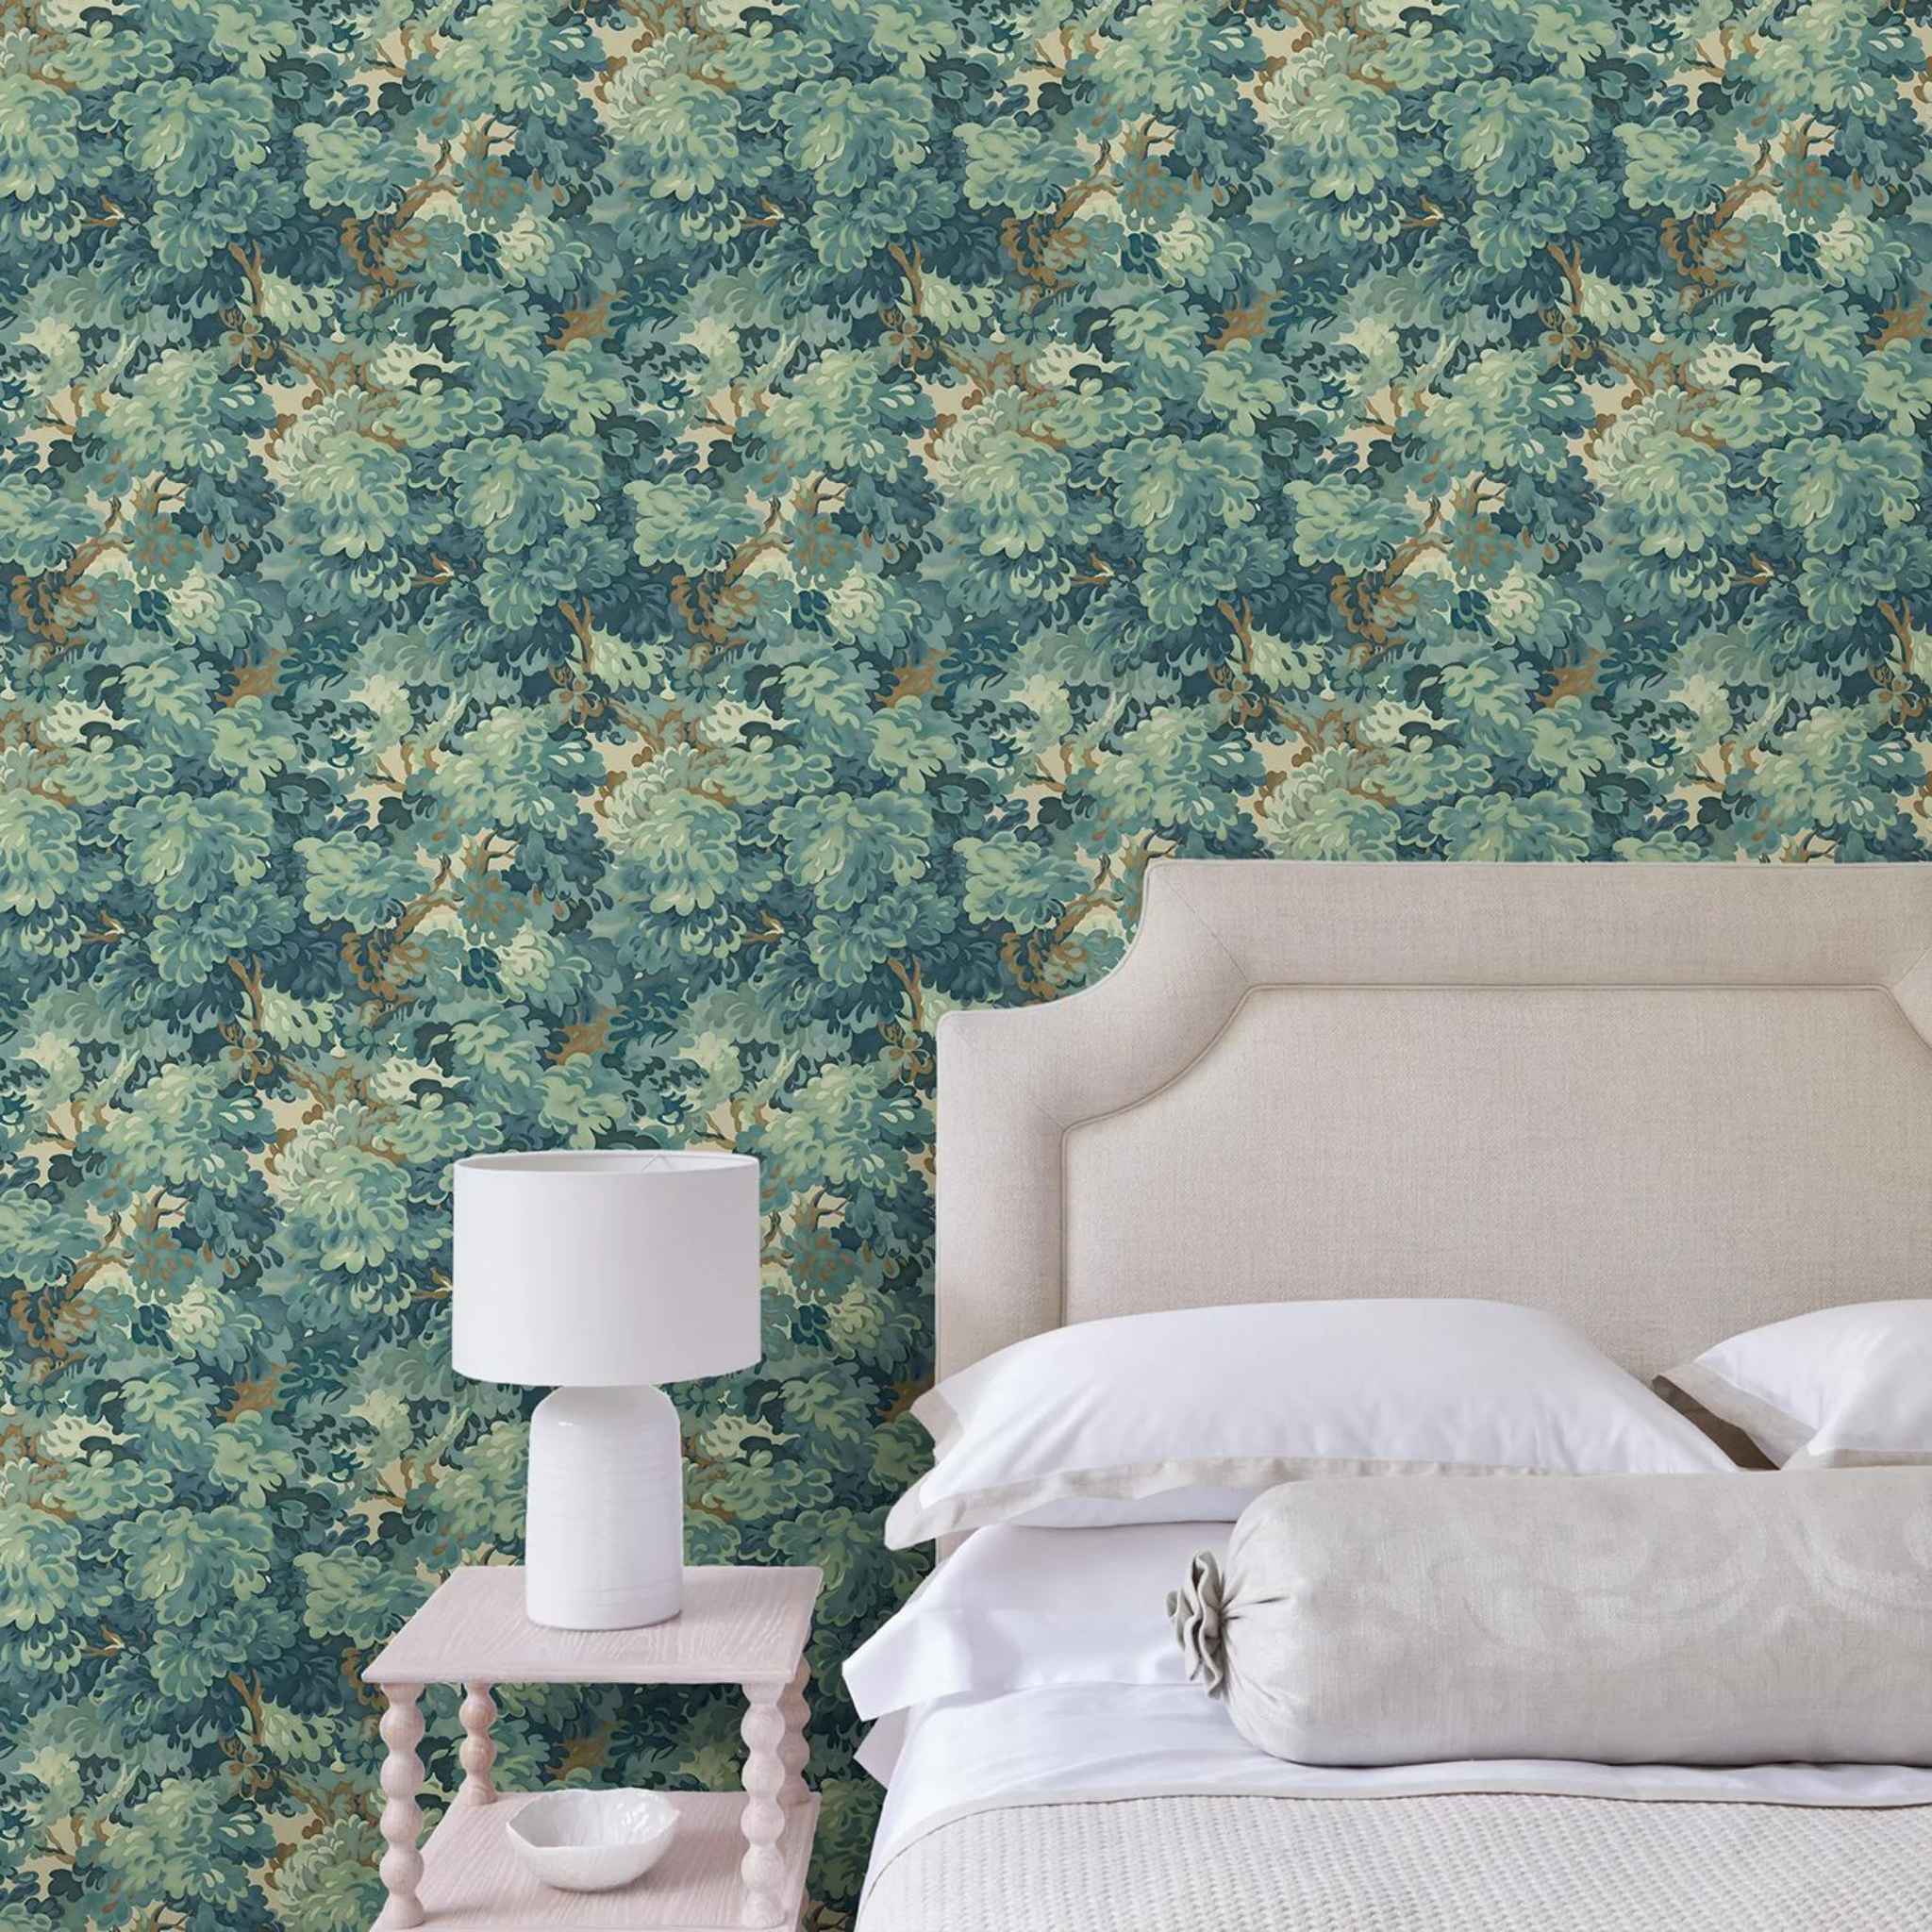 wallpaper linen collections, Linwood Introduce Wallpaper and Linen Collections with Detailed Patterns